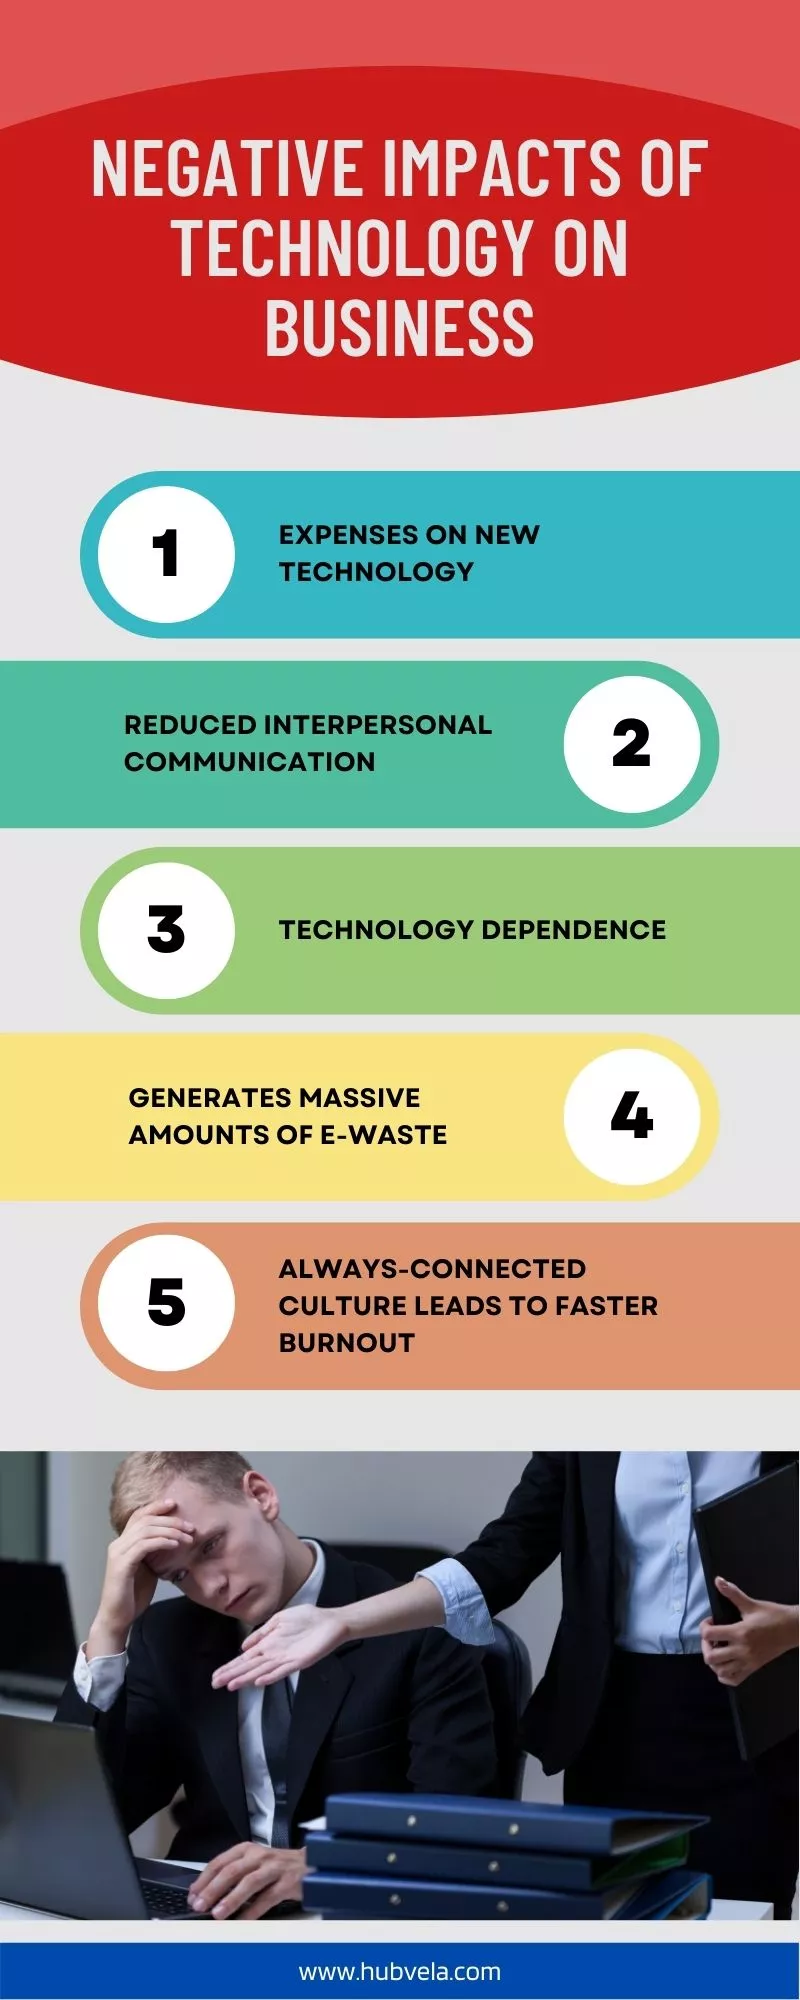 Negative Impacts of Technology on Business infographic